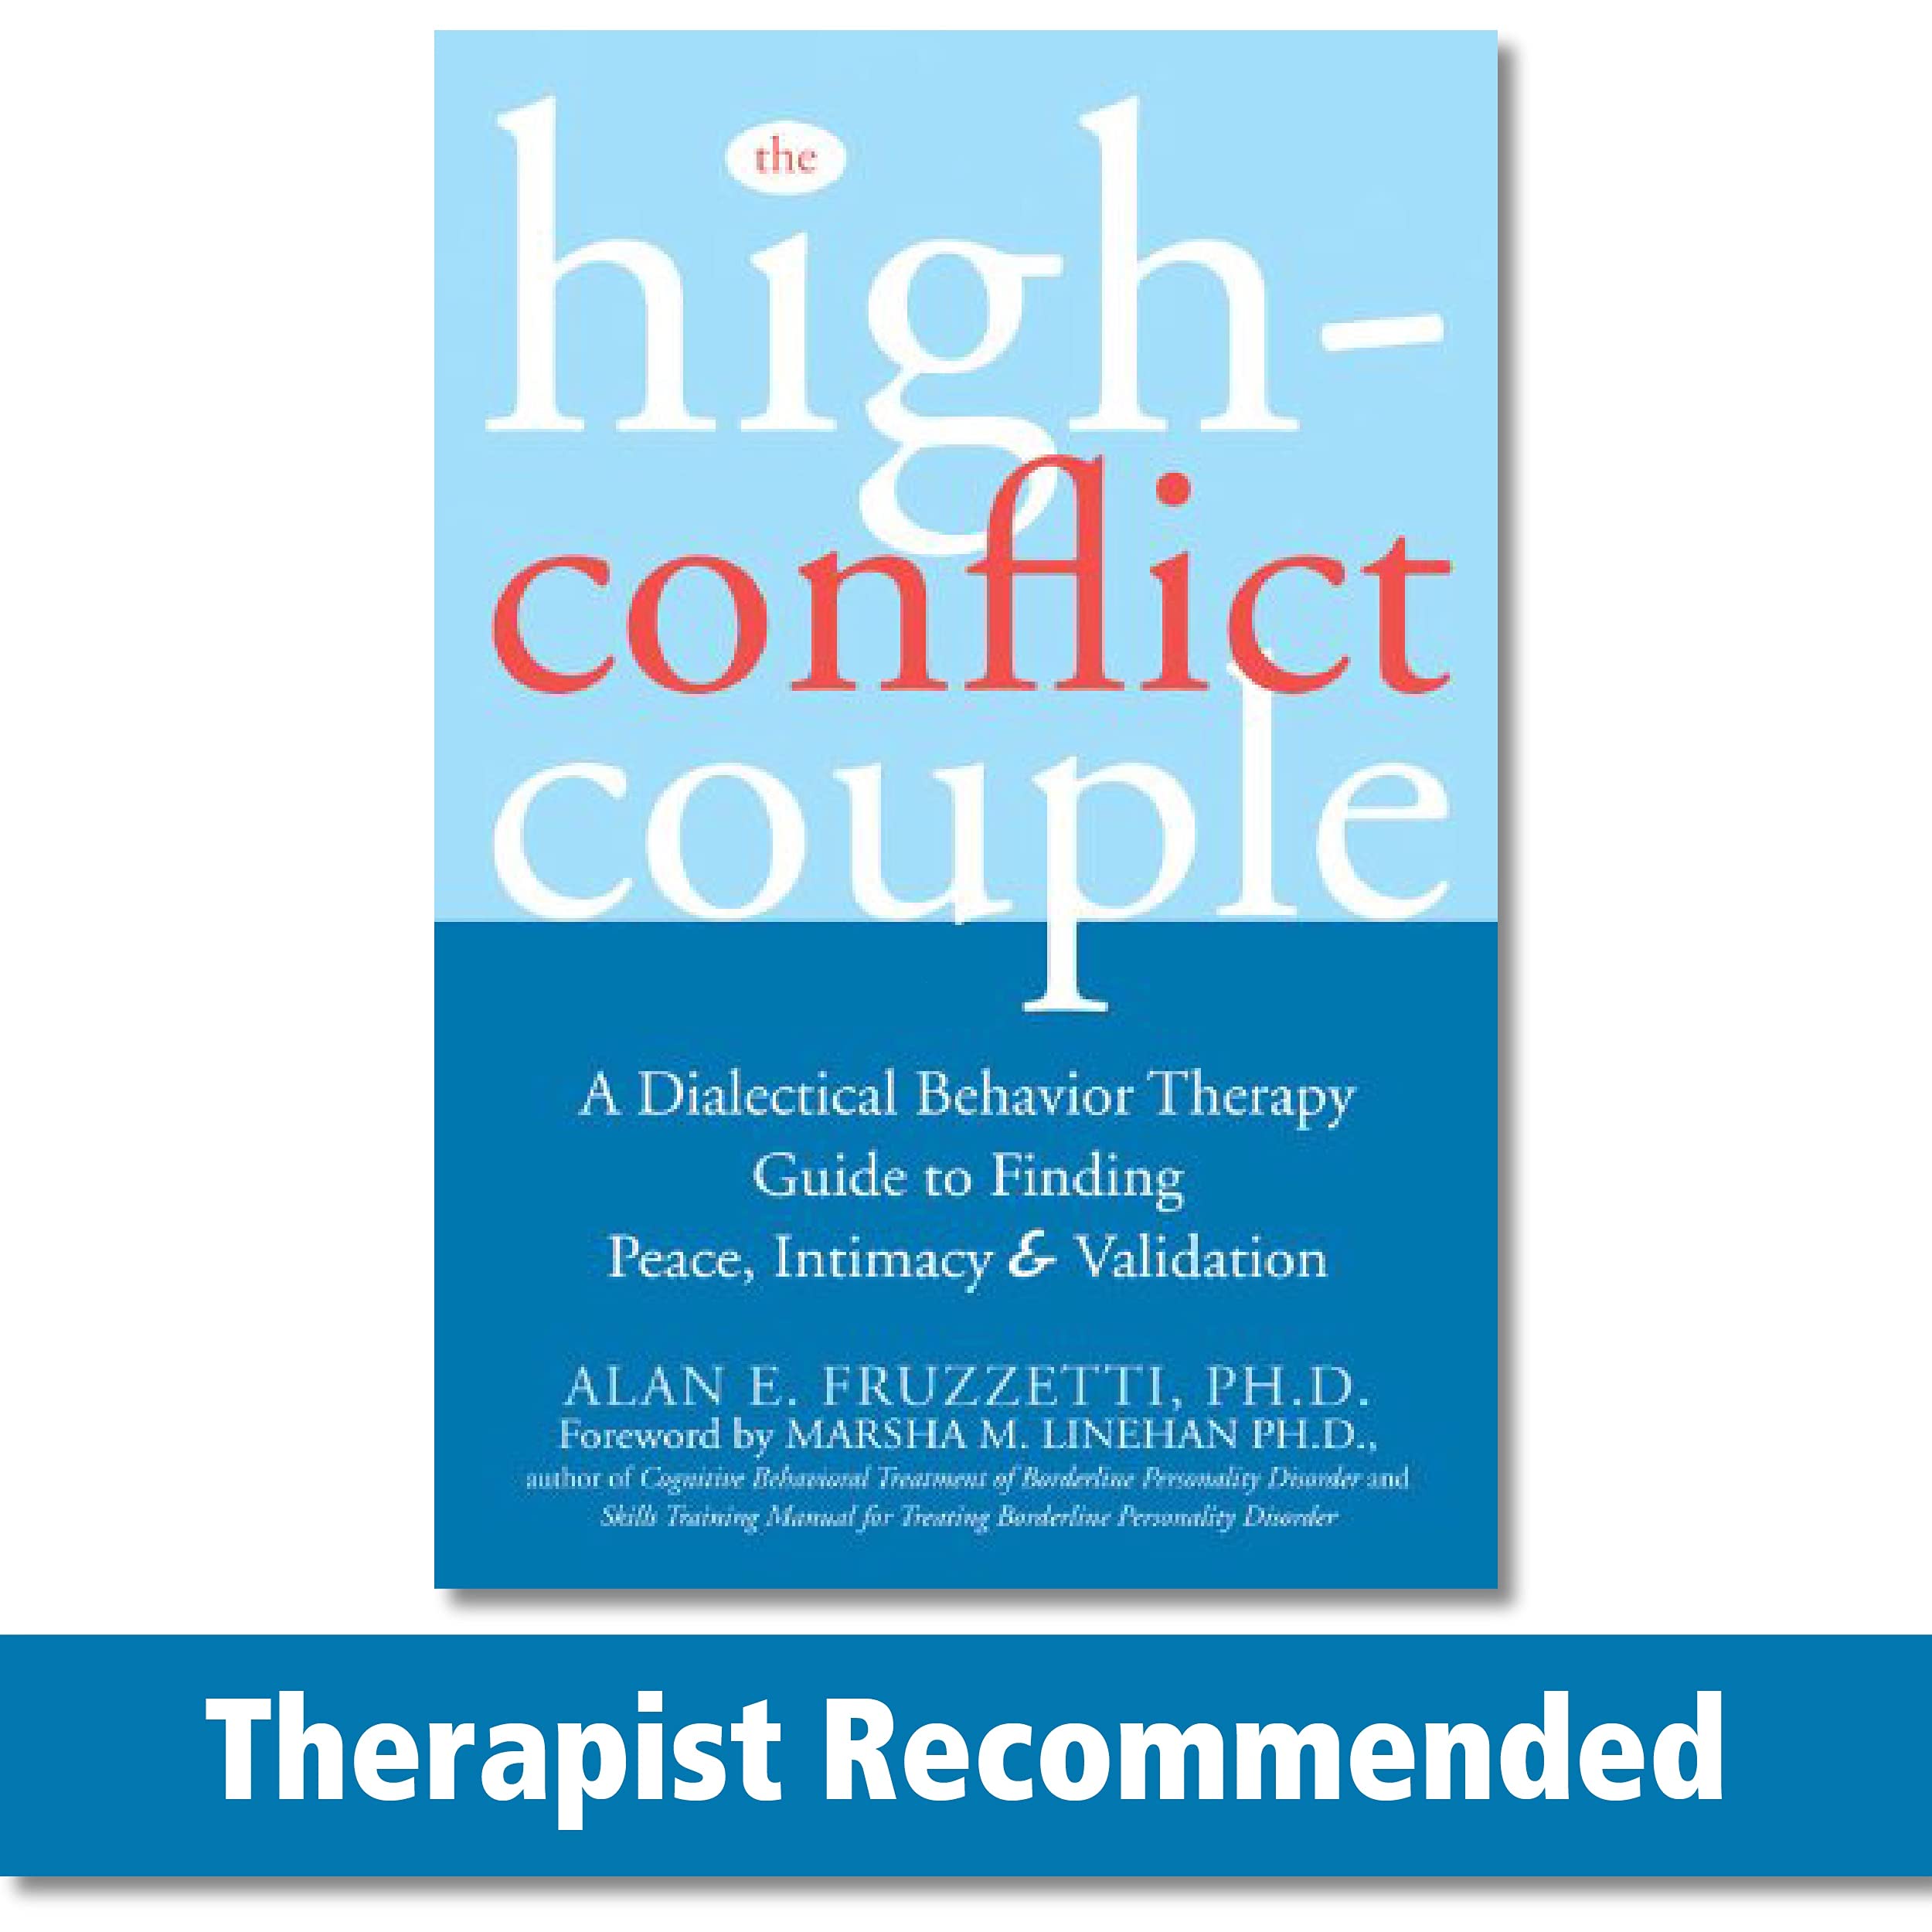 bpd resources: high conflict couple, a DBT guide to finding peace, intimacy & validation